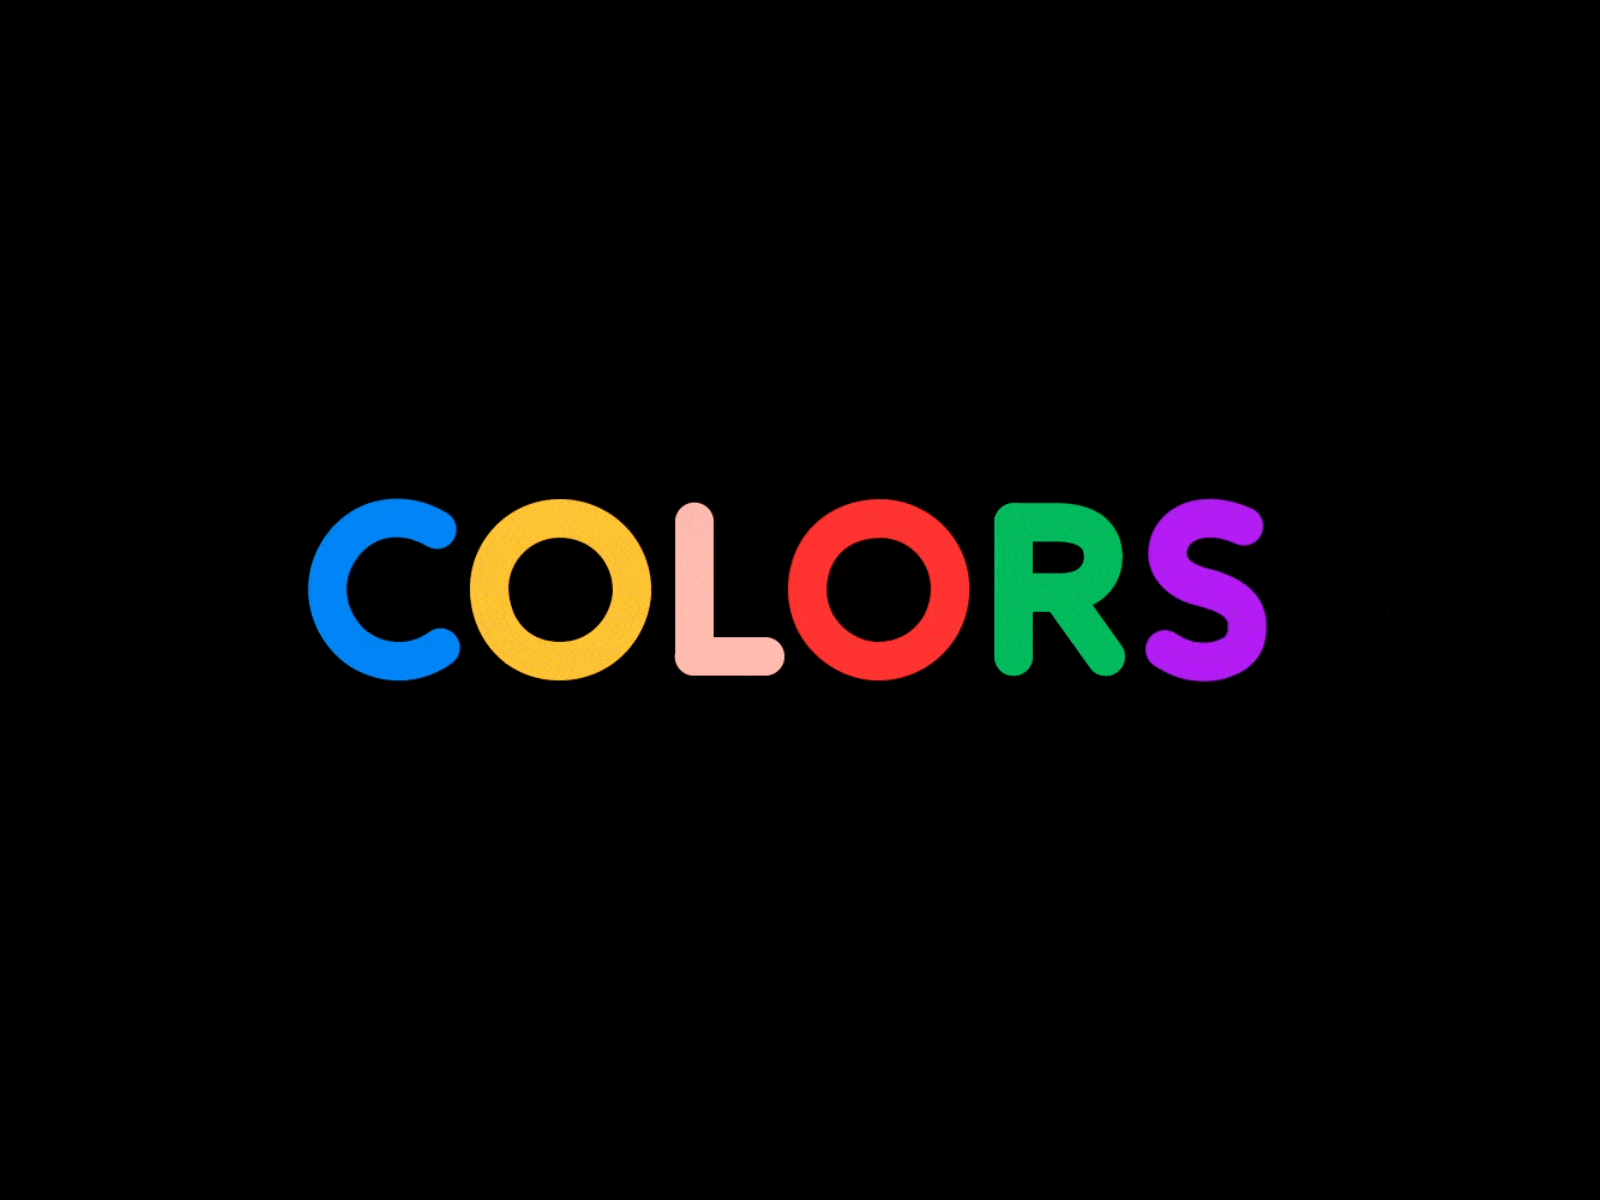 Colors by Sofie Nilsson on Dribbble